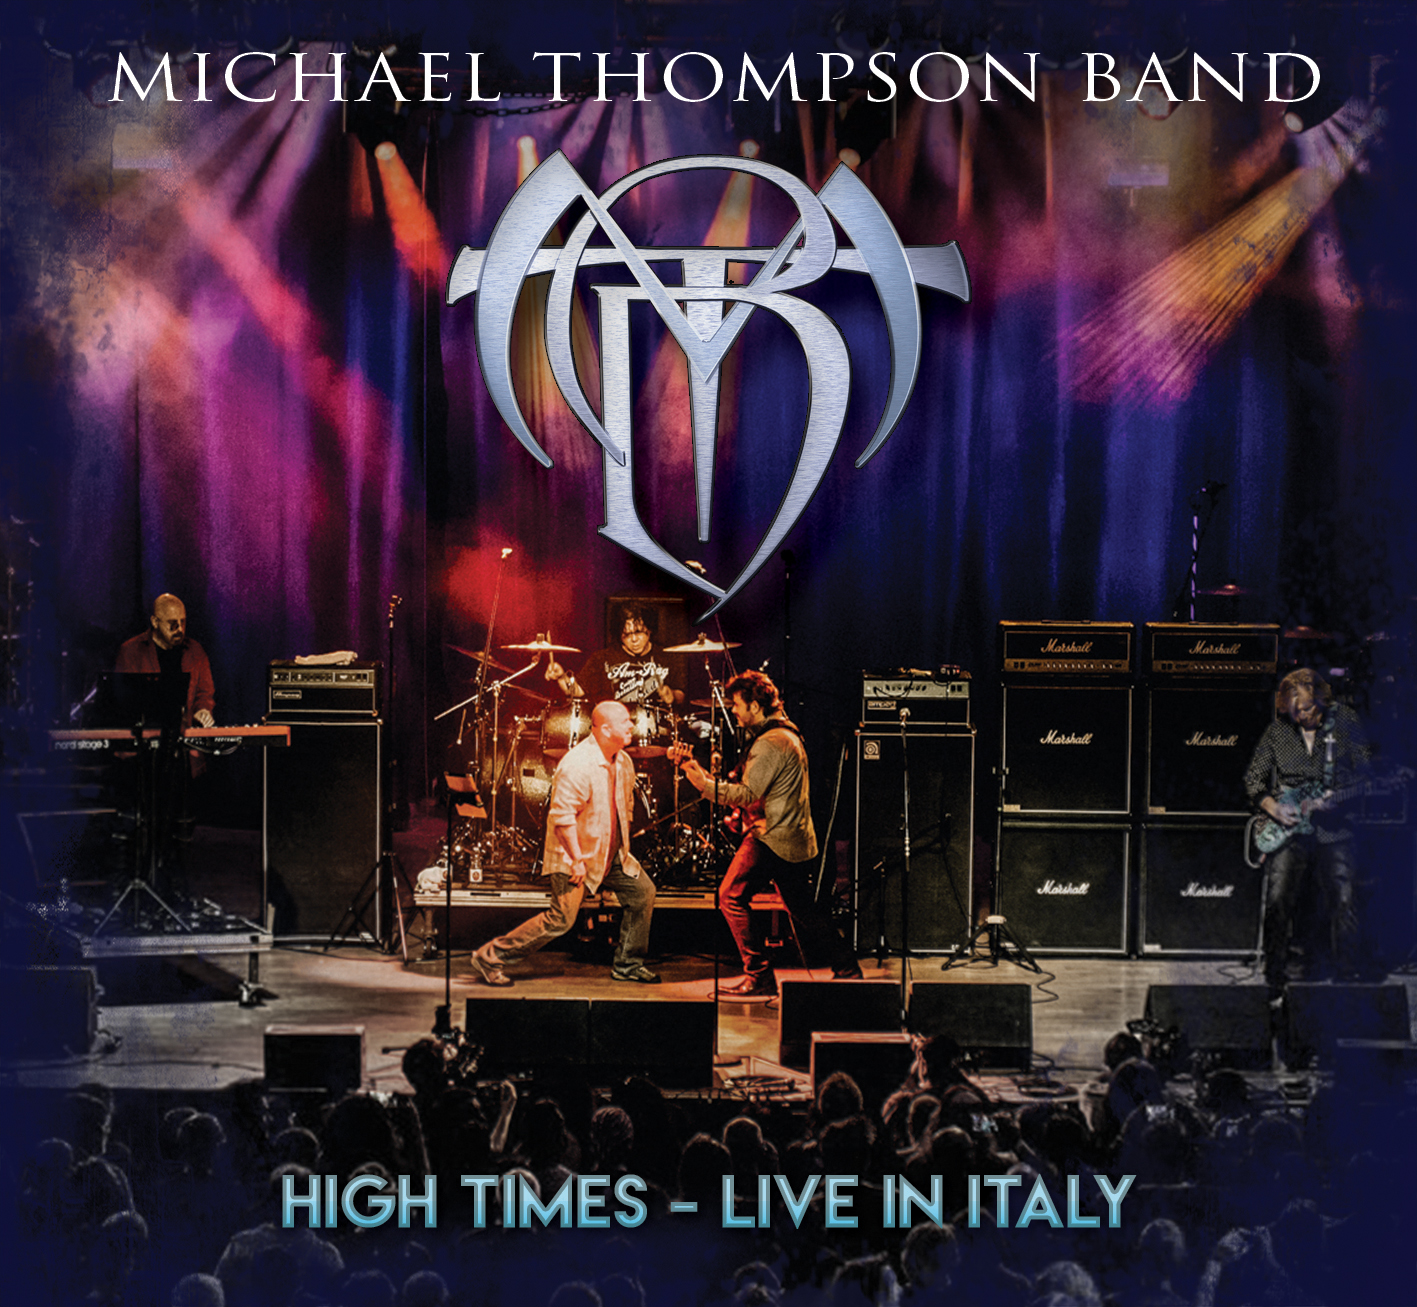 Michael Thompson Band - High Times - Live In Italy - CD+DVD